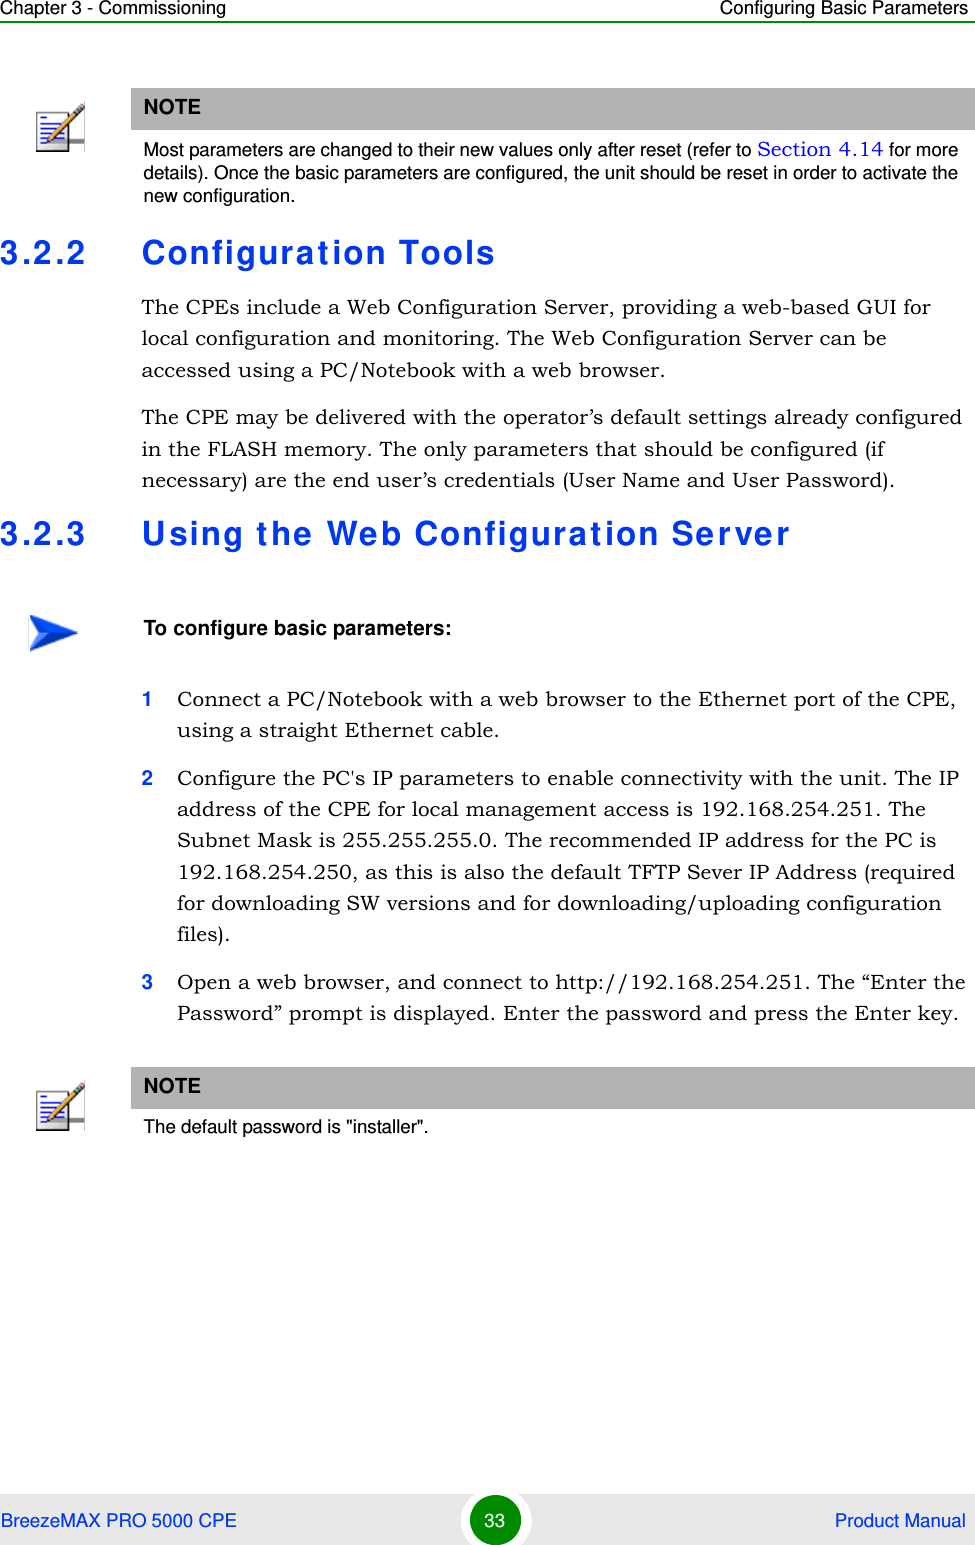 Chapter 3 - Commissioning Configuring Basic ParametersBreezeMAX PRO 5000 CPE 33  Product Manual3.2.2 Configurat ion ToolsThe CPEs include a Web Configuration Server, providing a web-based GUI for local configuration and monitoring. The Web Configuration Server can be accessed using a PC/Notebook with a web browser.The CPE may be delivered with the operator’s default settings already configured in the FLASH memory. The only parameters that should be configured (if necessary) are the end user’s credentials (User Name and User Password).3.2.3 Using the  Web Configurat ion Server1Connect a PC/Notebook with a web browser to the Ethernet port of the CPE, using a straight Ethernet cable.2Configure the PC&apos;s IP parameters to enable connectivity with the unit. The IP address of the CPE for local management access is 192.168.254.251. The Subnet Mask is 255.255.255.0. The recommended IP address for the PC is 192.168.254.250, as this is also the default TFTP Sever IP Address (required for downloading SW versions and for downloading/uploading configuration files). 3Open a web browser, and connect to http://192.168.254.251. The “Enter the Password” prompt is displayed. Enter the password and press the Enter key.NOTEMost parameters are changed to their new values only after reset (refer to Section 4.14 for more details). Once the basic parameters are configured, the unit should be reset in order to activate the new configuration.To configure basic parameters:NOTEThe default password is &quot;installer&quot;.